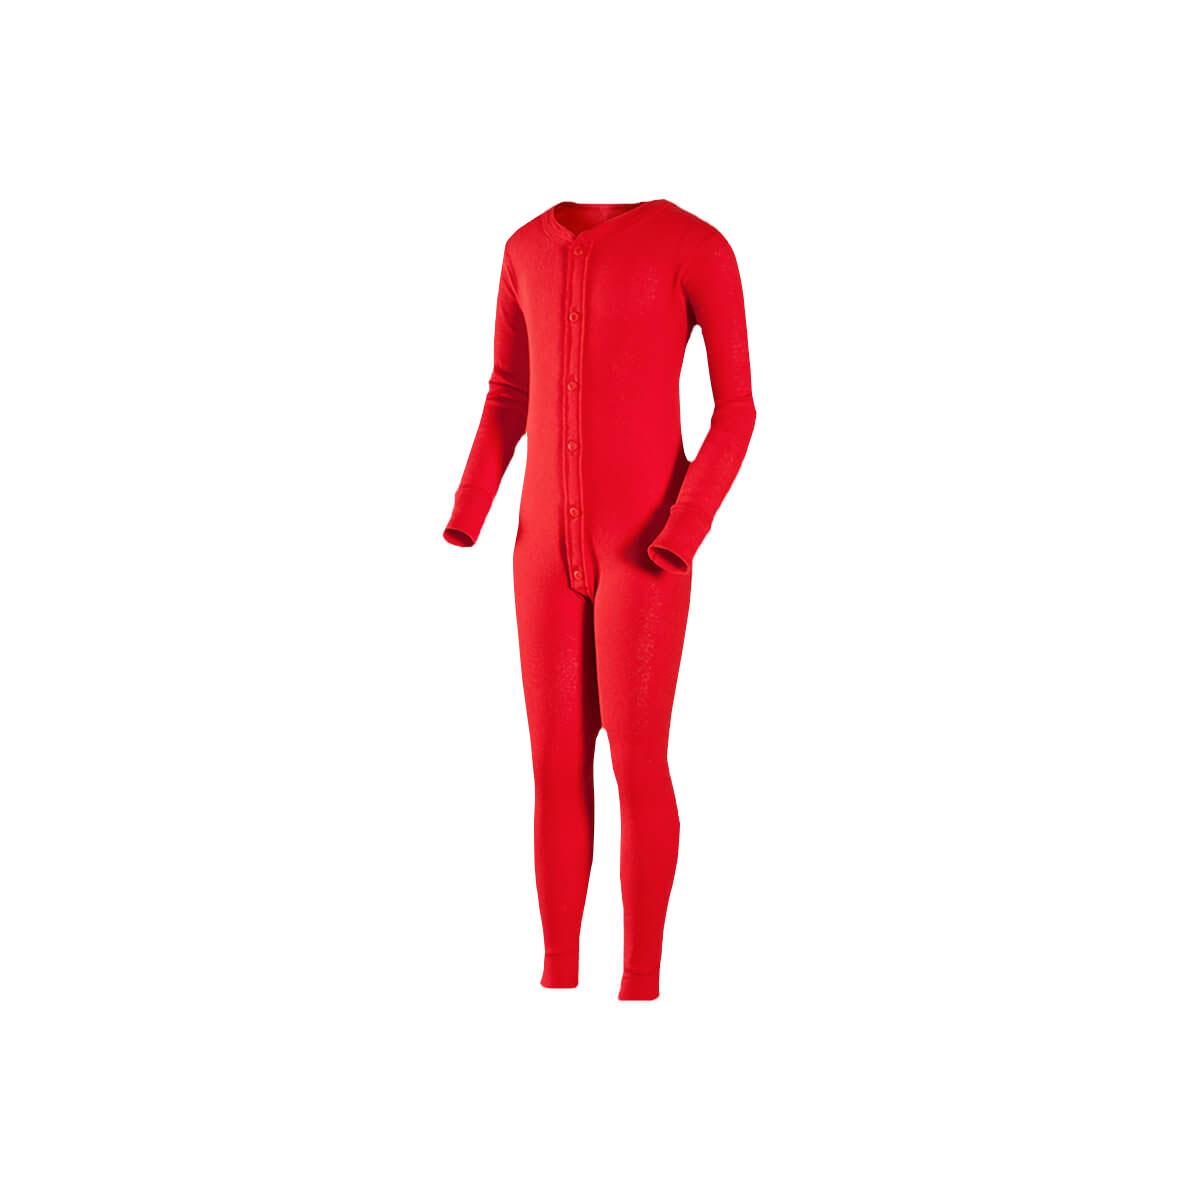  Youth Red Union Suit